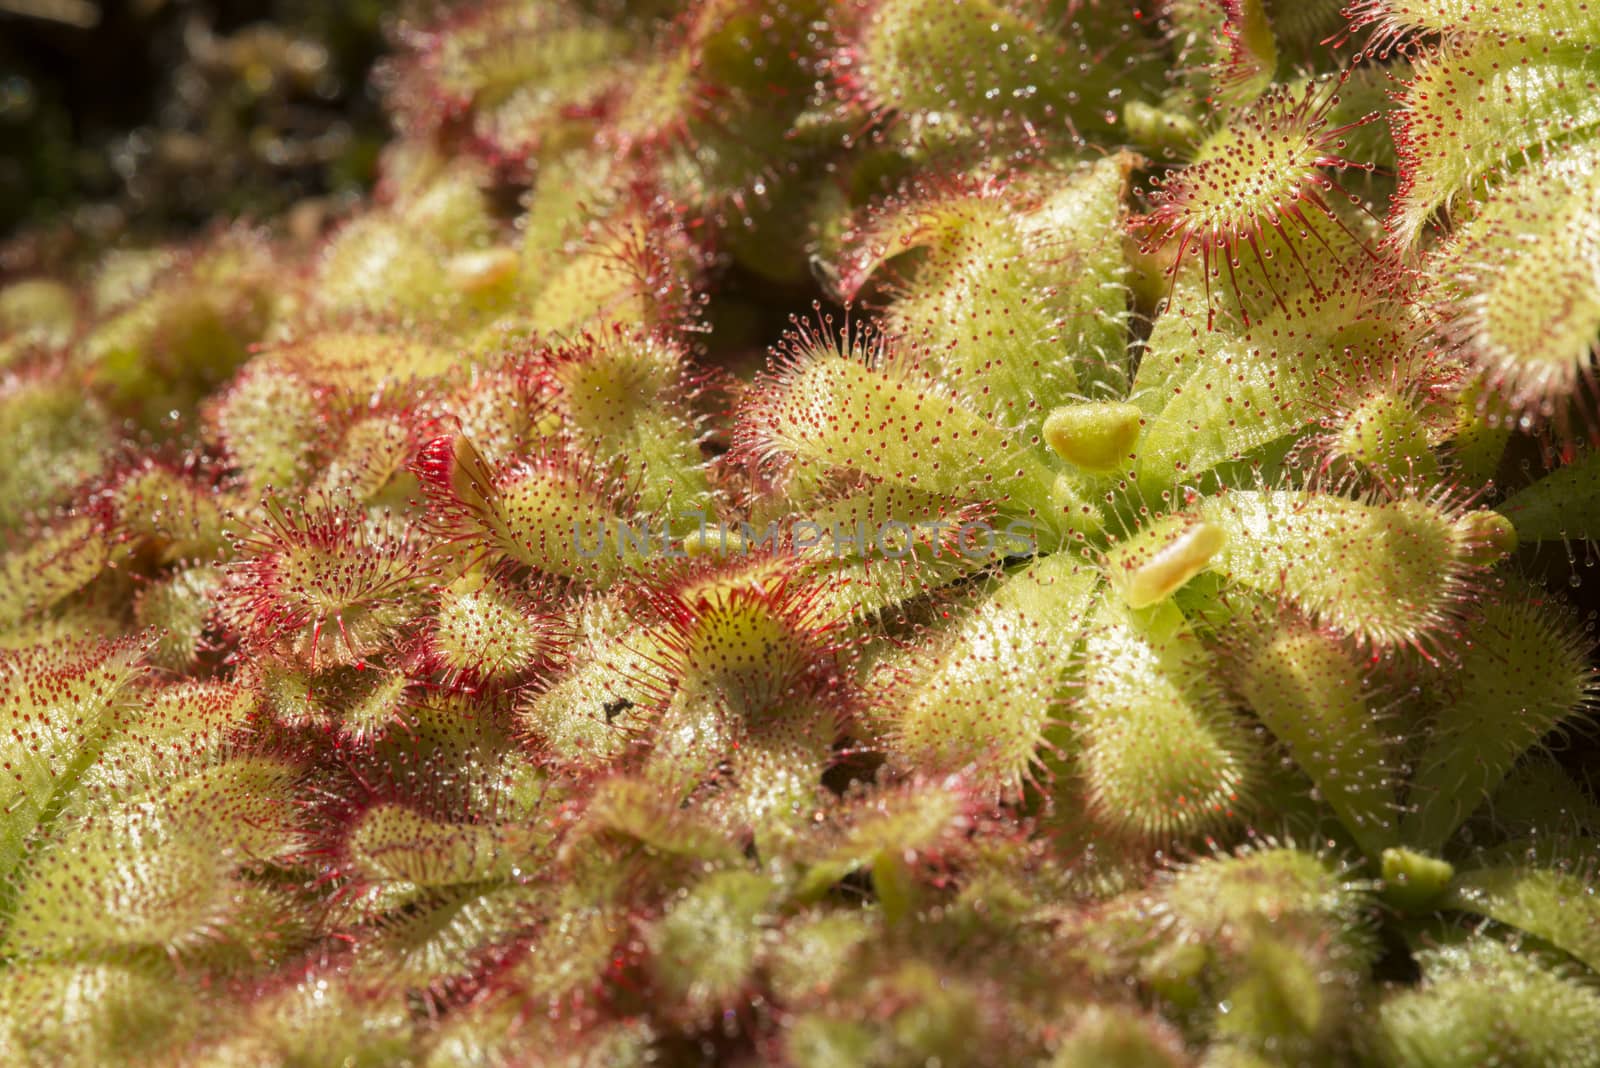 Sundew insectivorous plants of Drosera. by AlessandroZocc